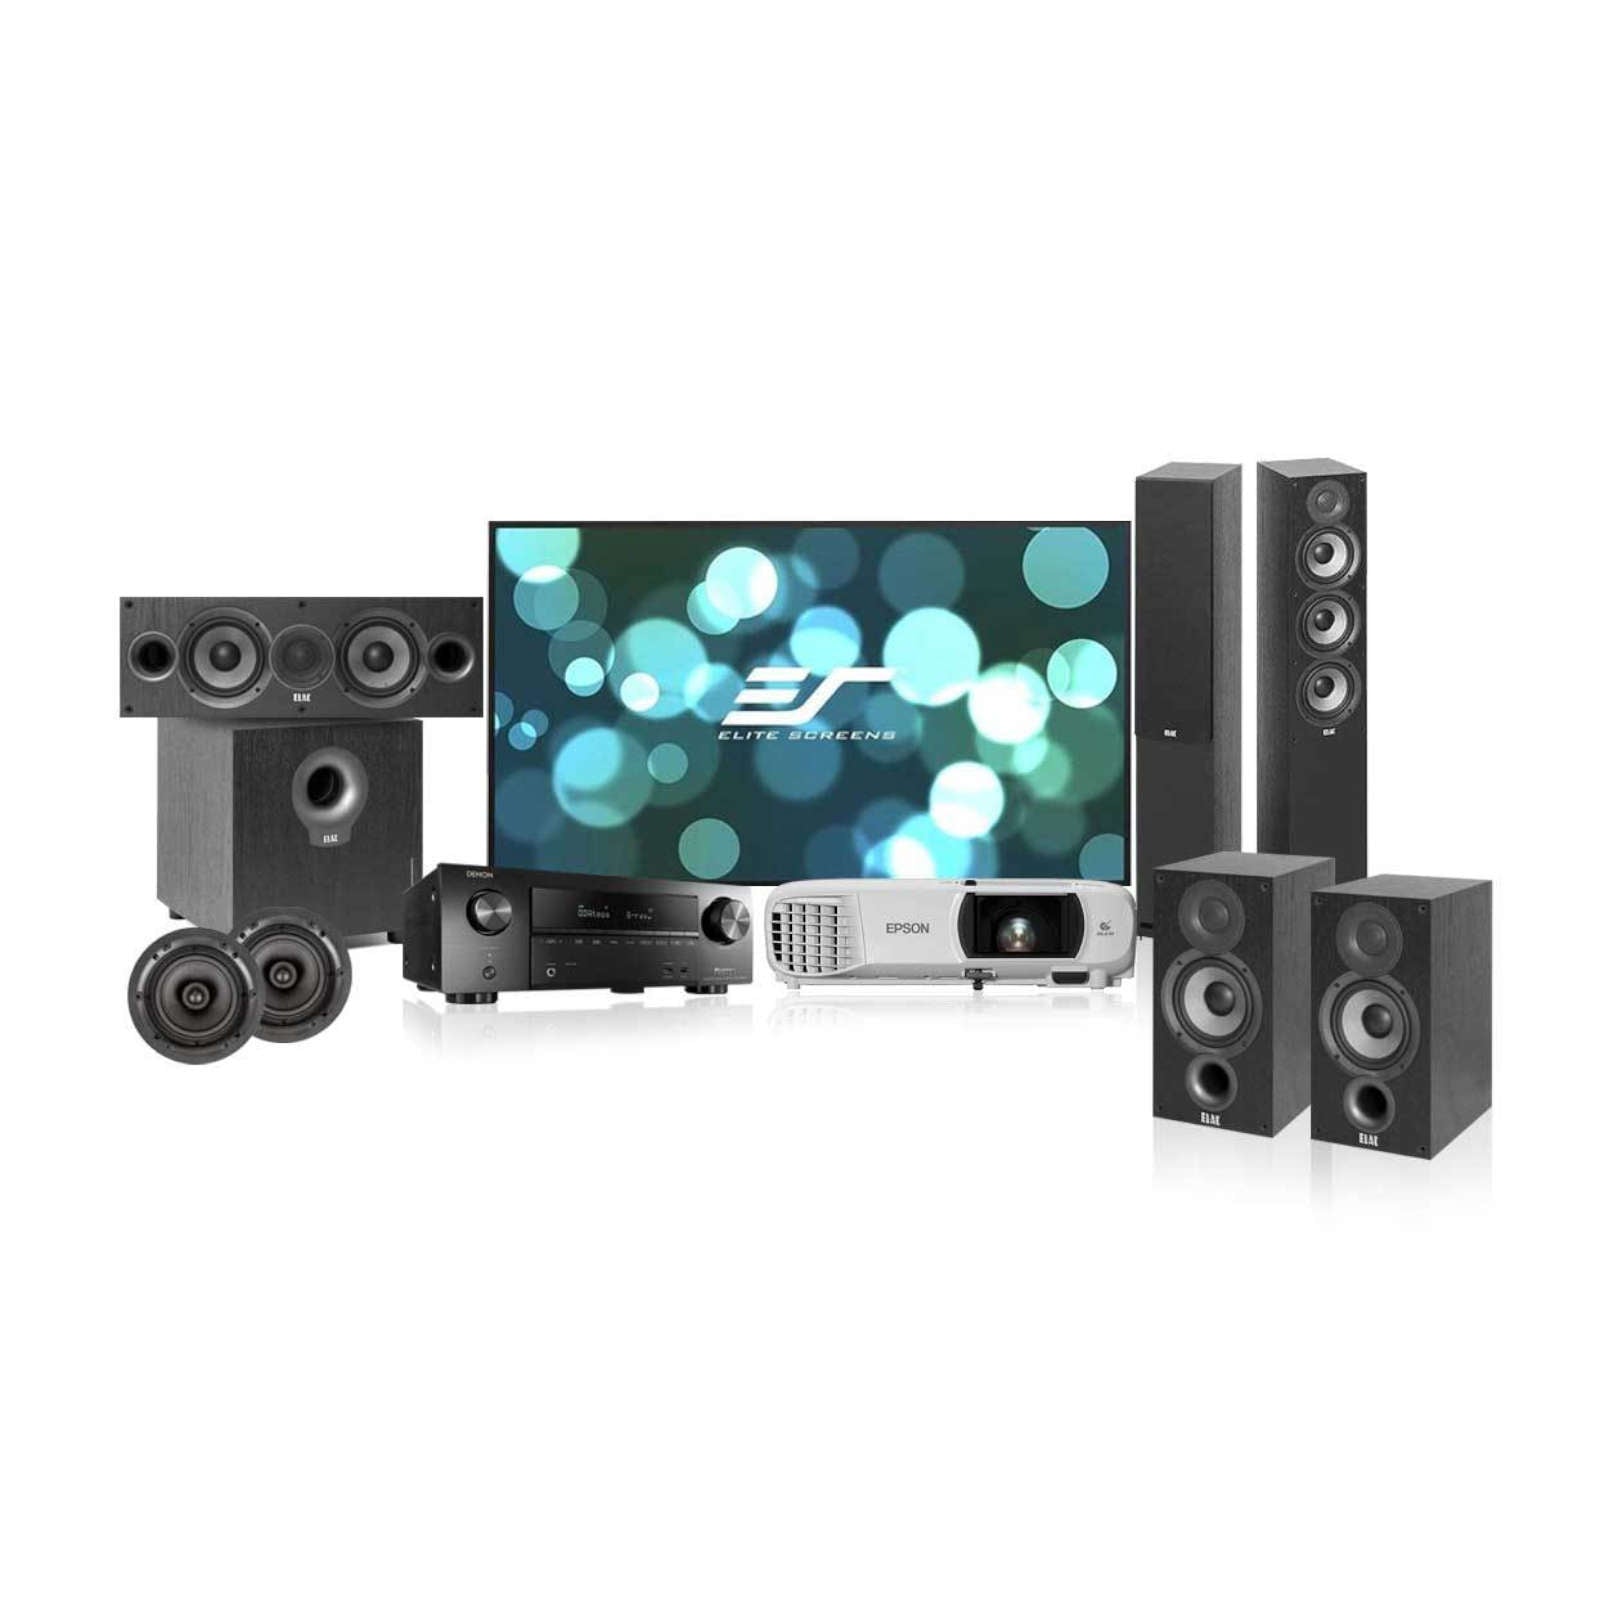 Home Theater Solution with Denon AVR-X1700H AVR for 150-200 sq ft room -  Ooberpad India